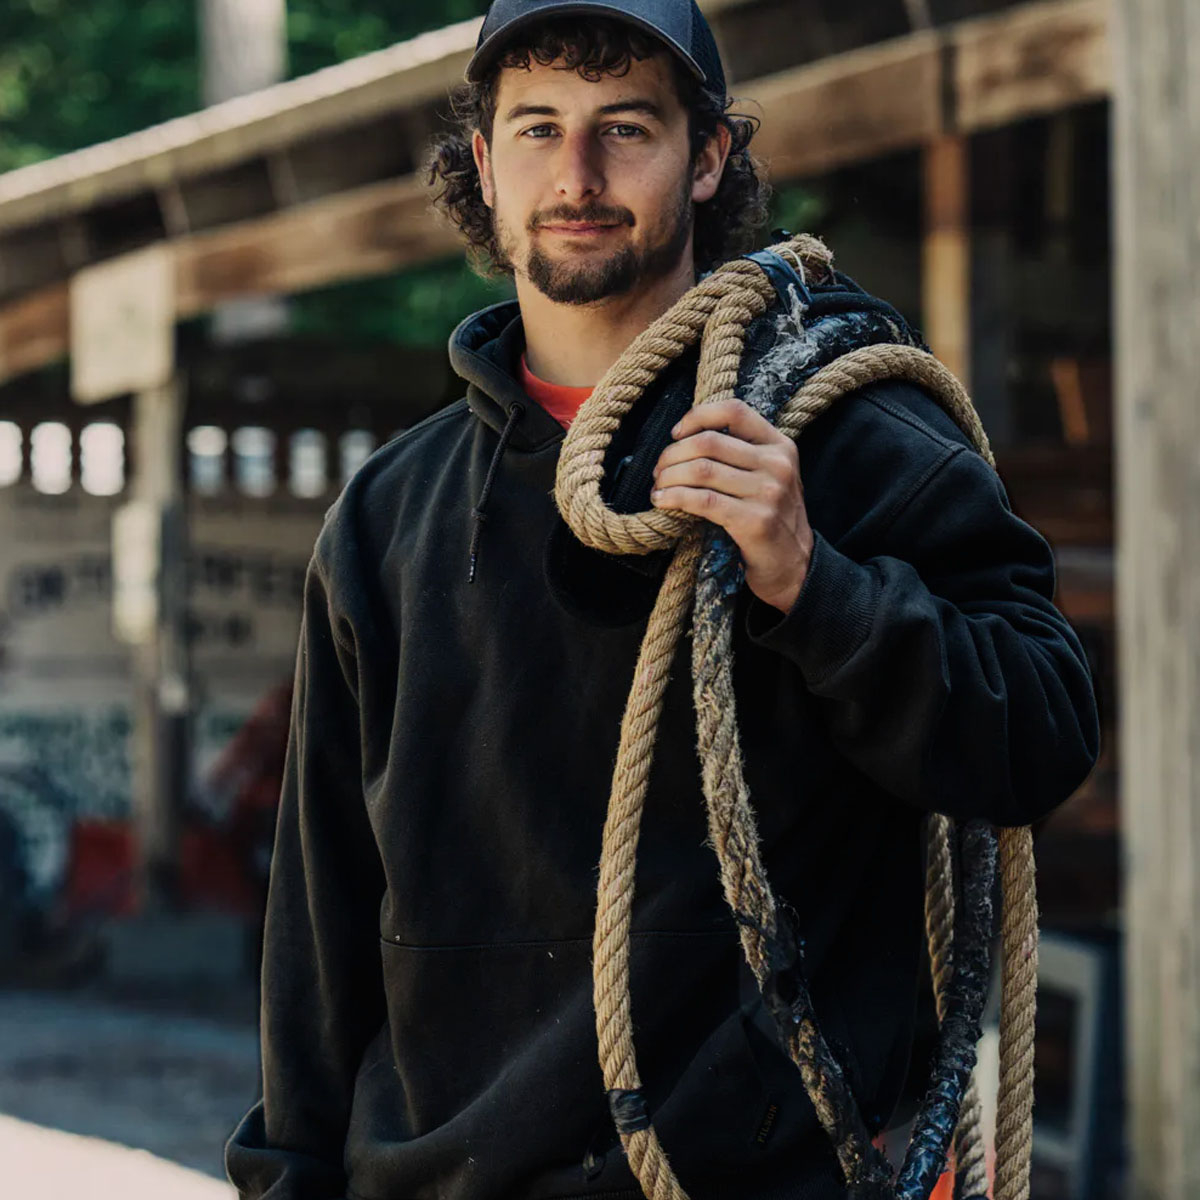 Filson Prospector Hoodie Black, an ideal baselayer in cold weather conditions